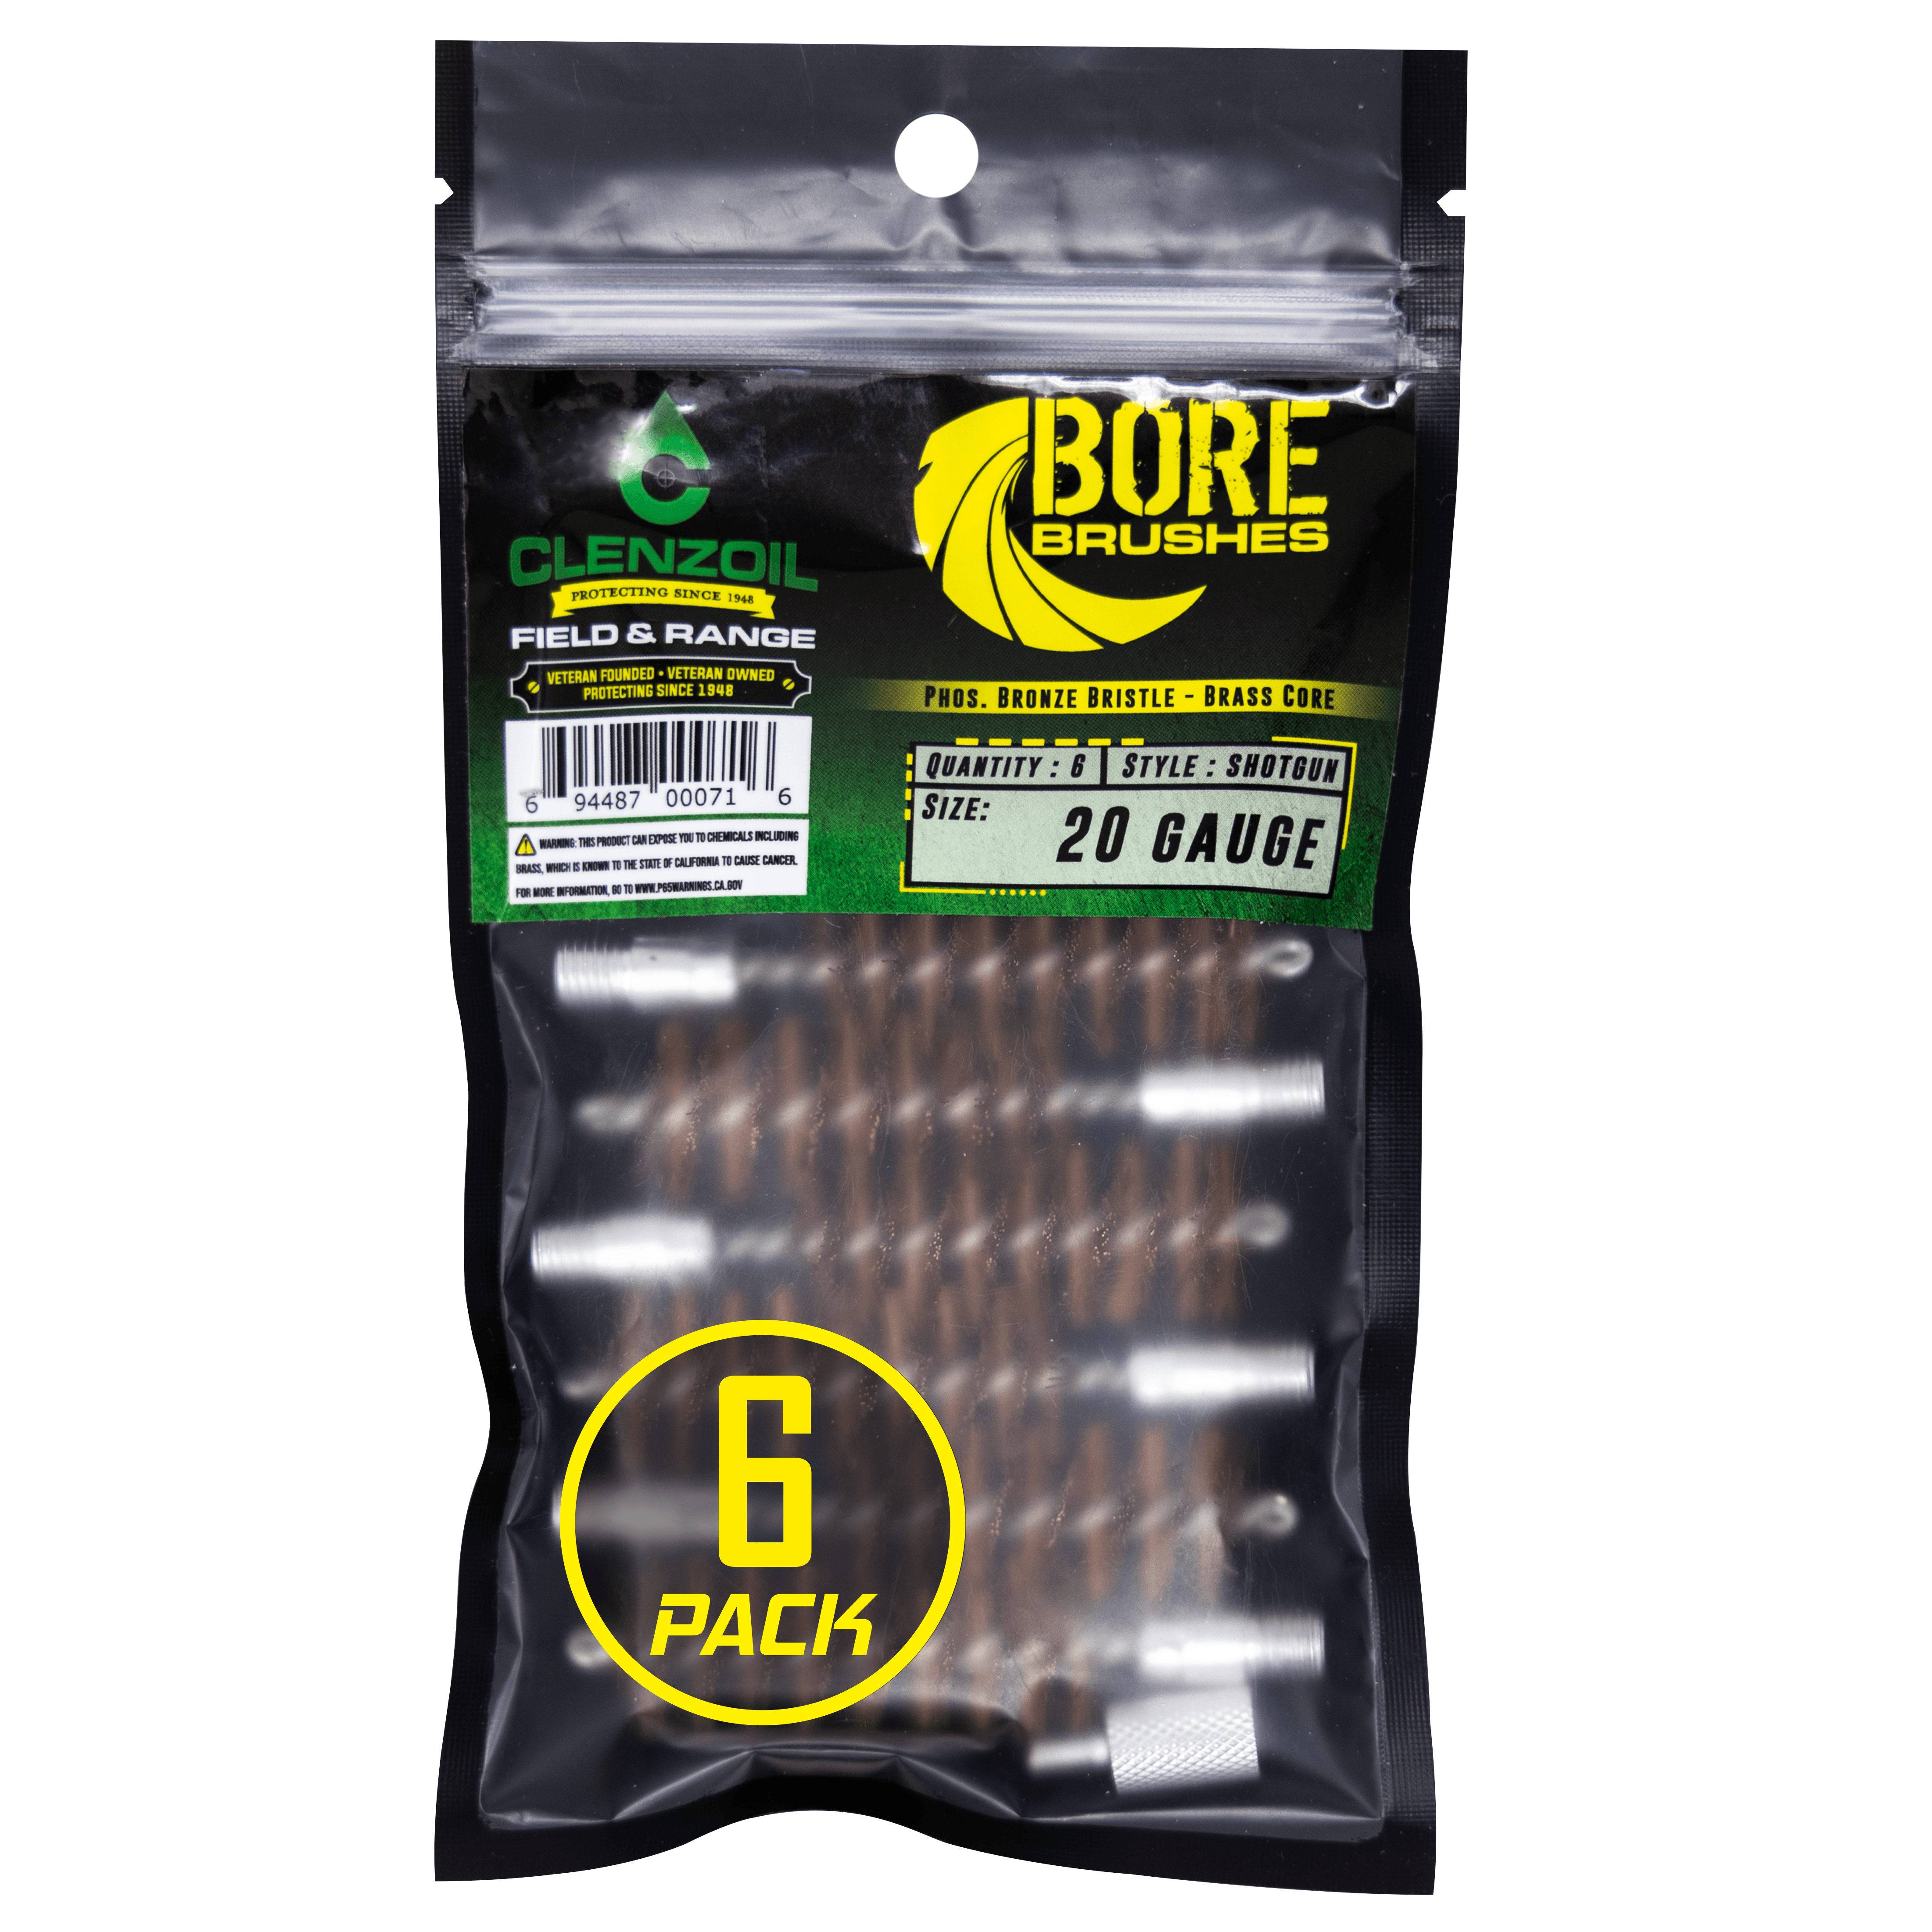 Bronze Bore Brushes - Clenzoil Unlimited